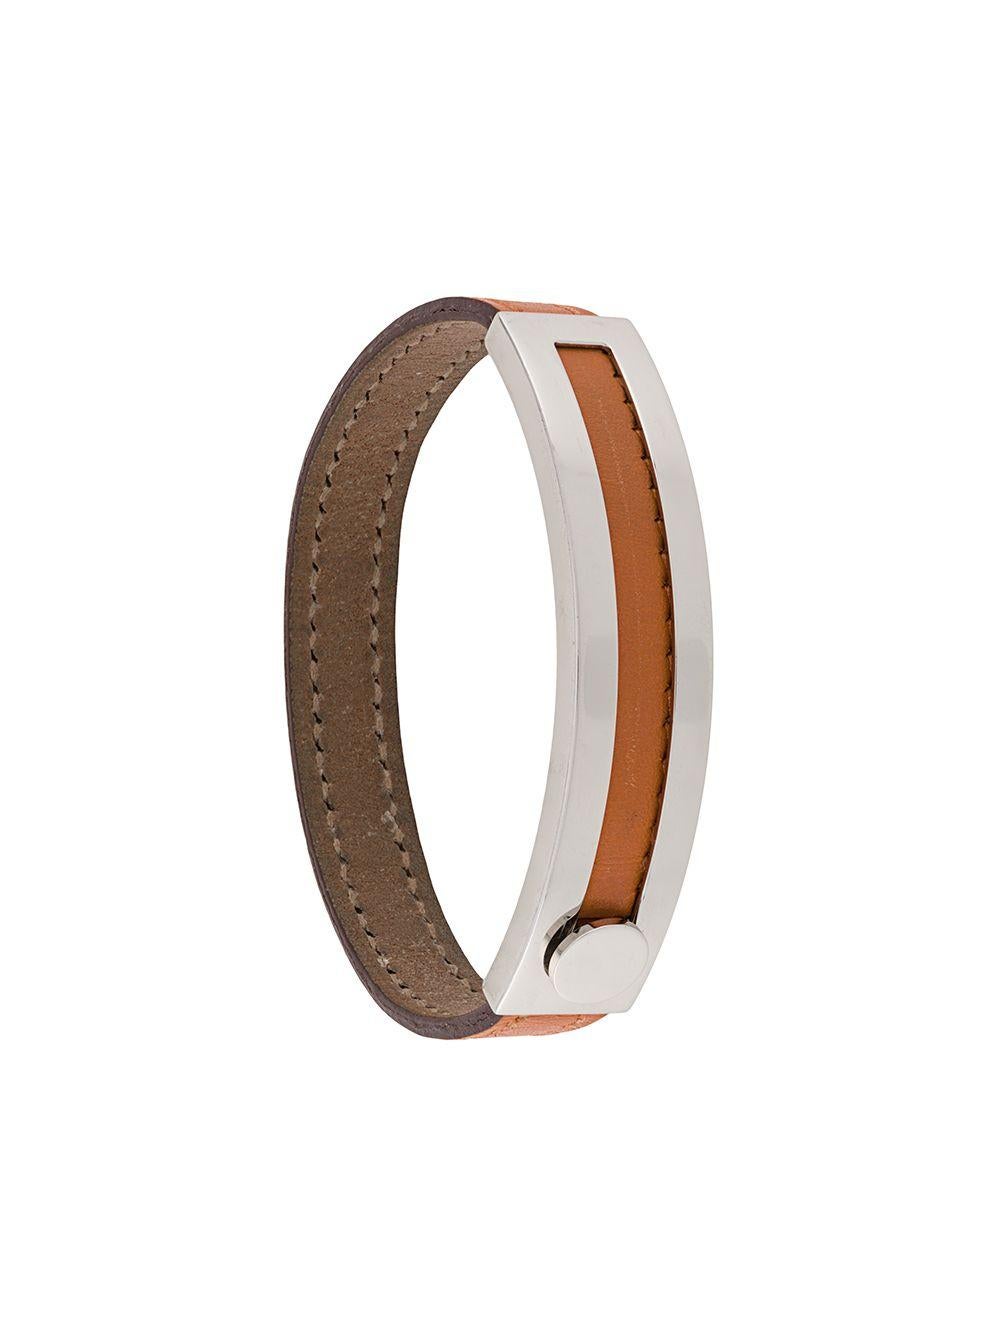 Crafted in France from a combination of beautiful orange leather and silver-tone metal hardware, this luxurious yet simple bangle bracelet from Hermès boasts a slim, two-tone design, a sliding clasp fastening and engraved metal detailing.

This bag